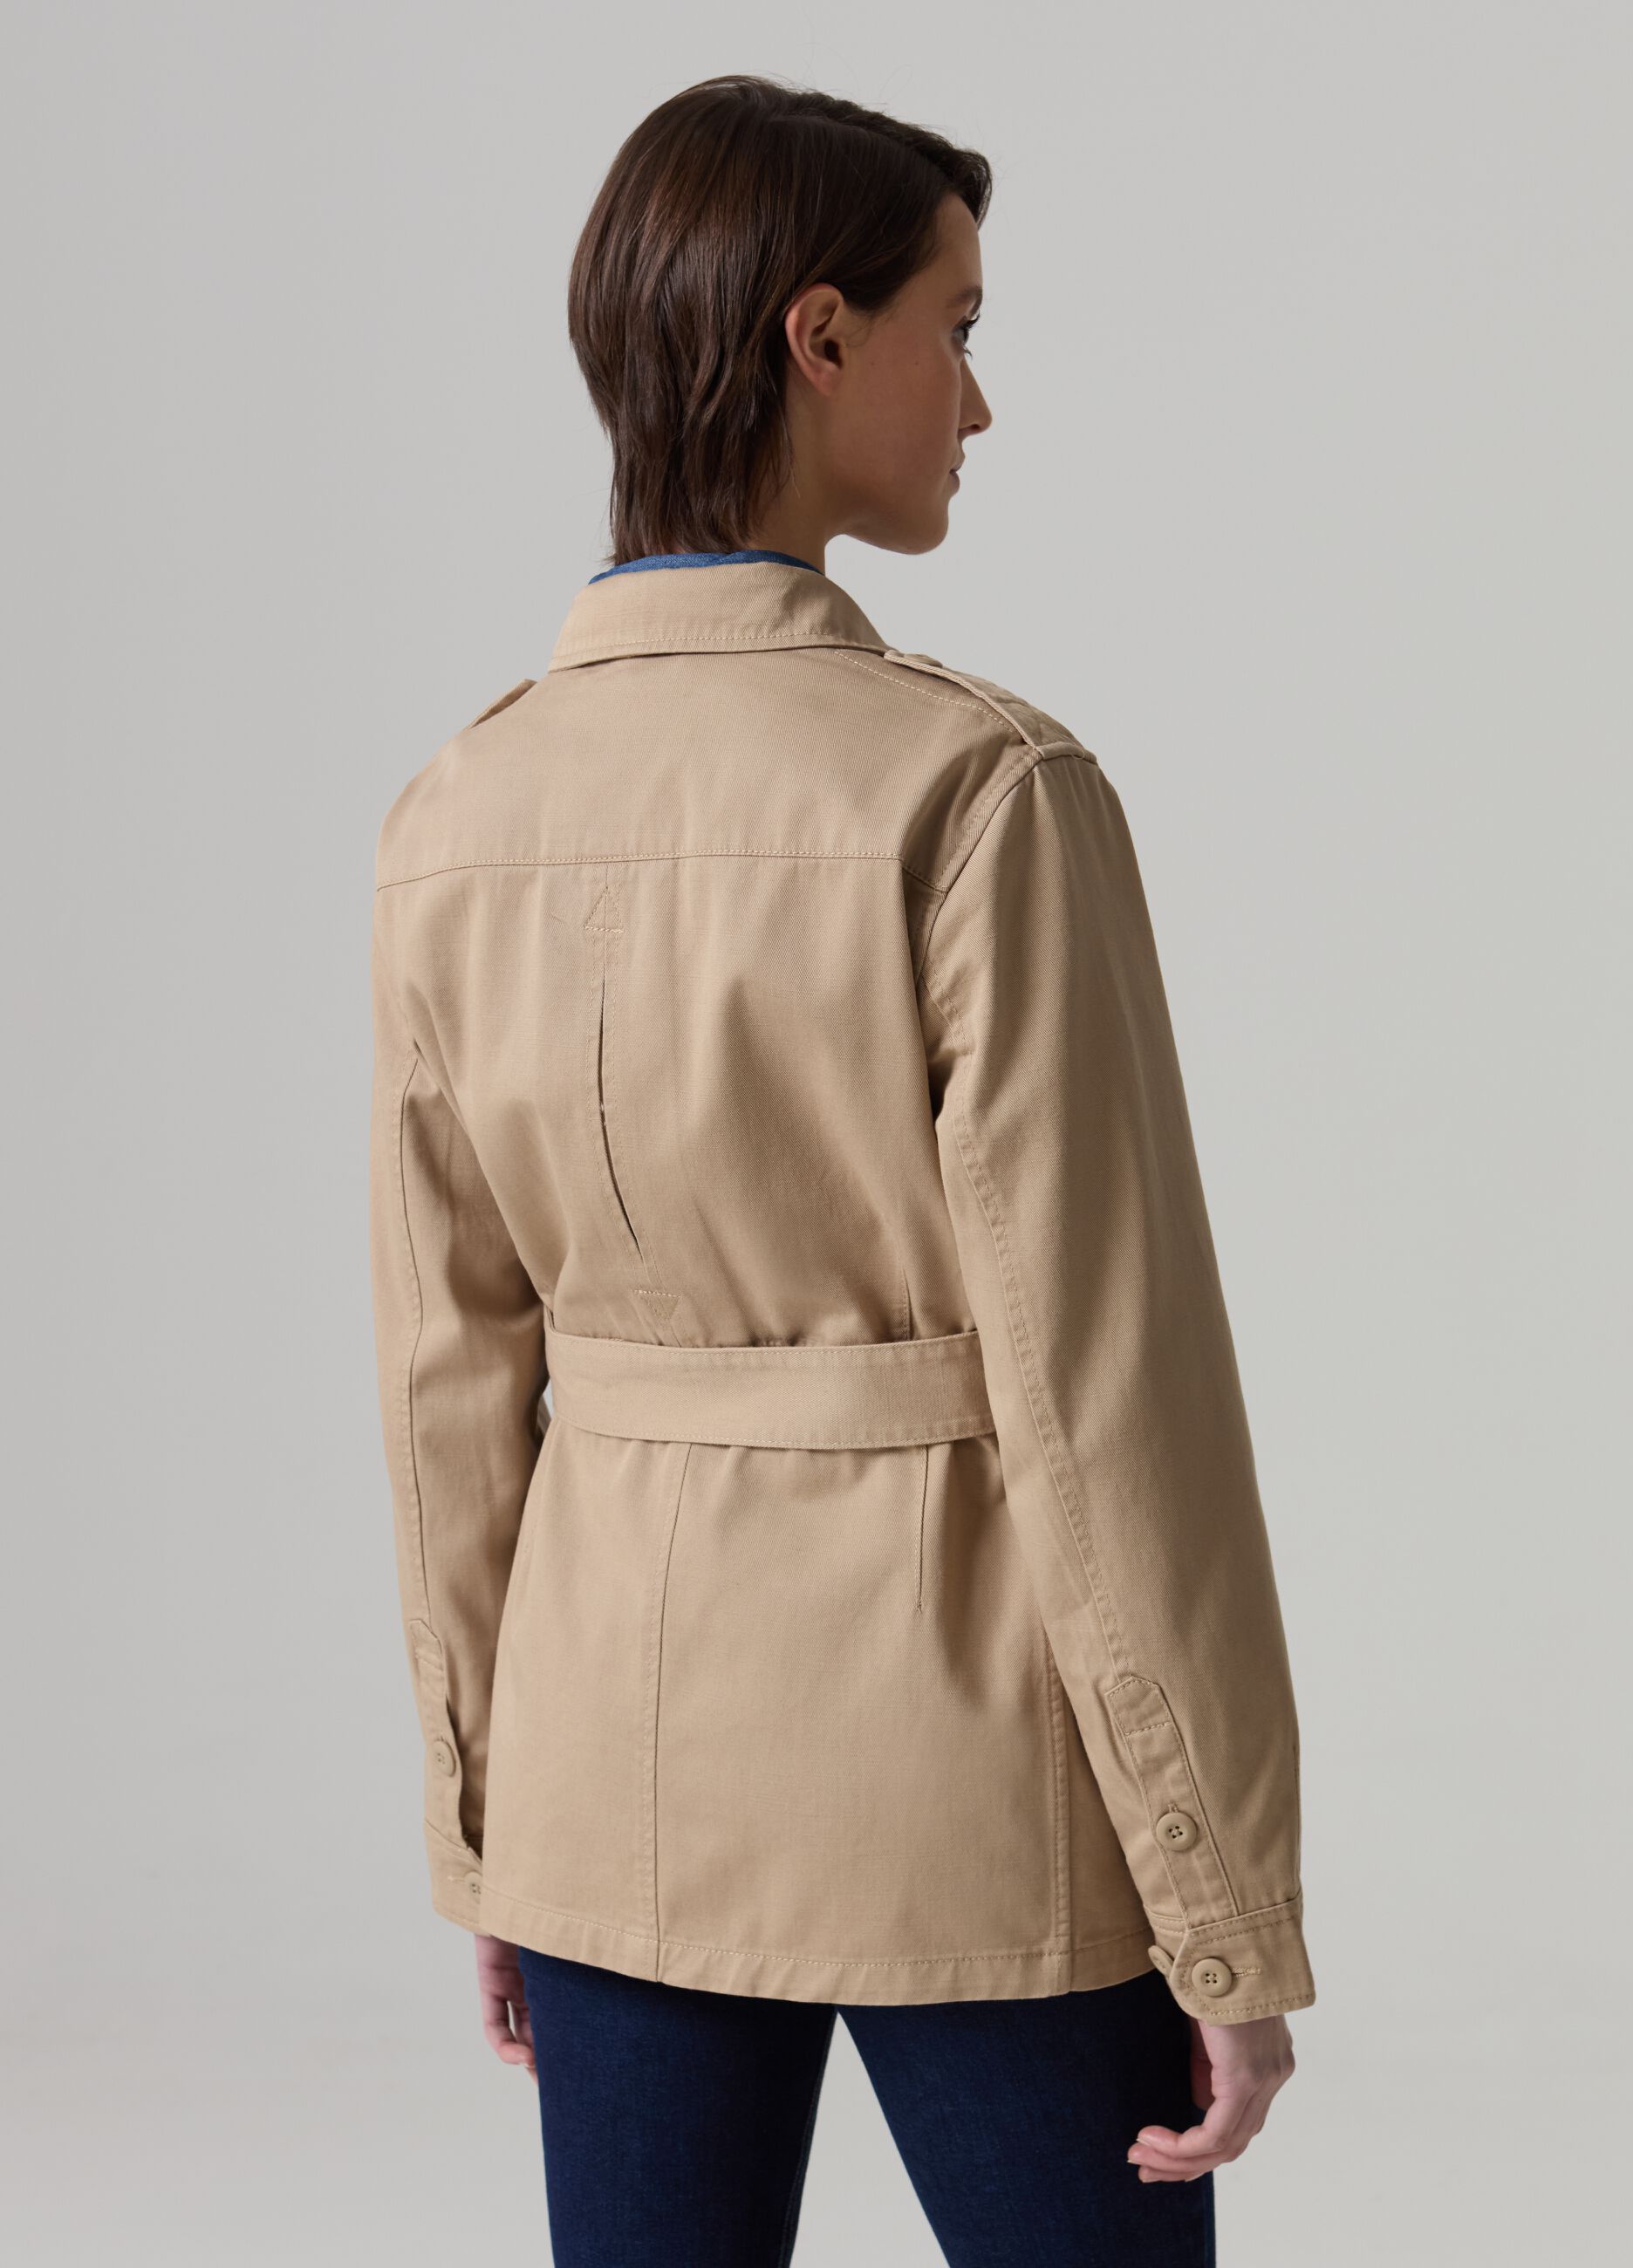 Safari jacket with buttons and belt